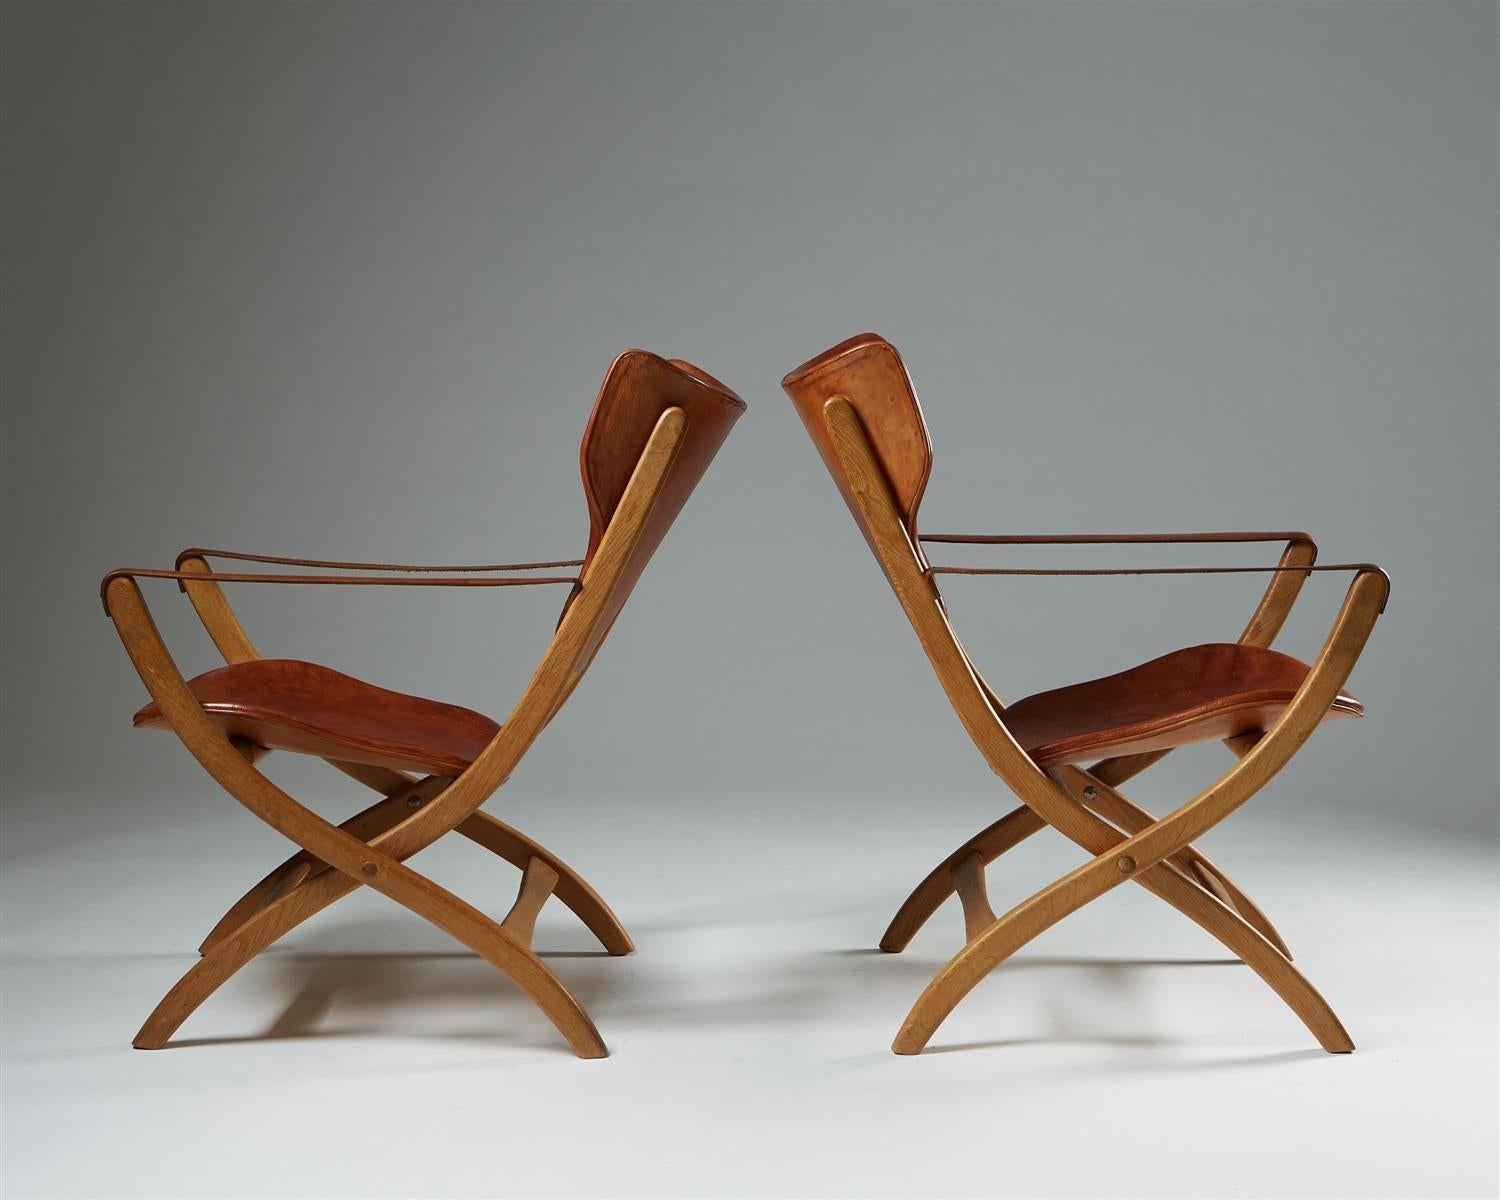 Folding armchair “Egyptian Chair” designed by Poul Hundevad, Denmark, 1950s.

Oak and natural leather.

One avaiable